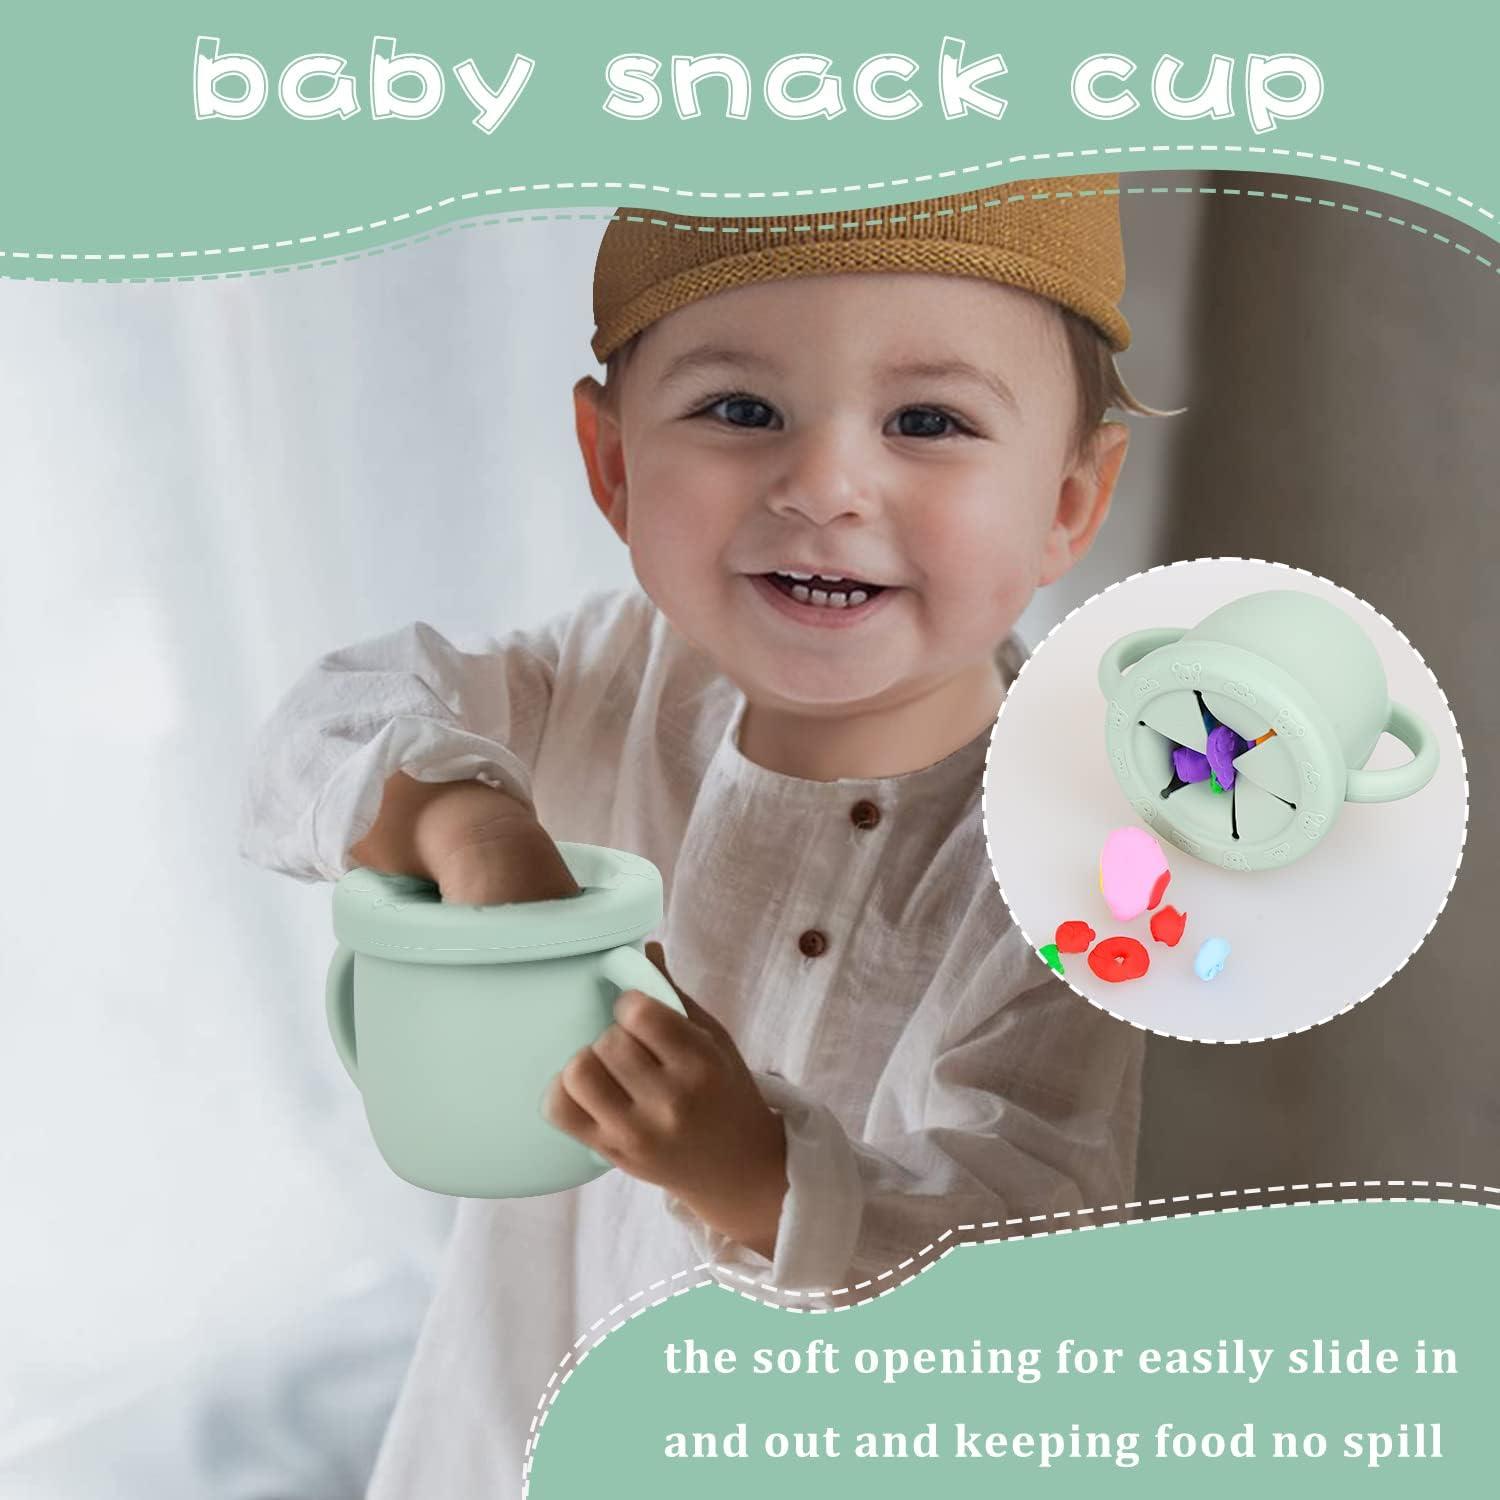 Little Cup, 3-in-1 training cup